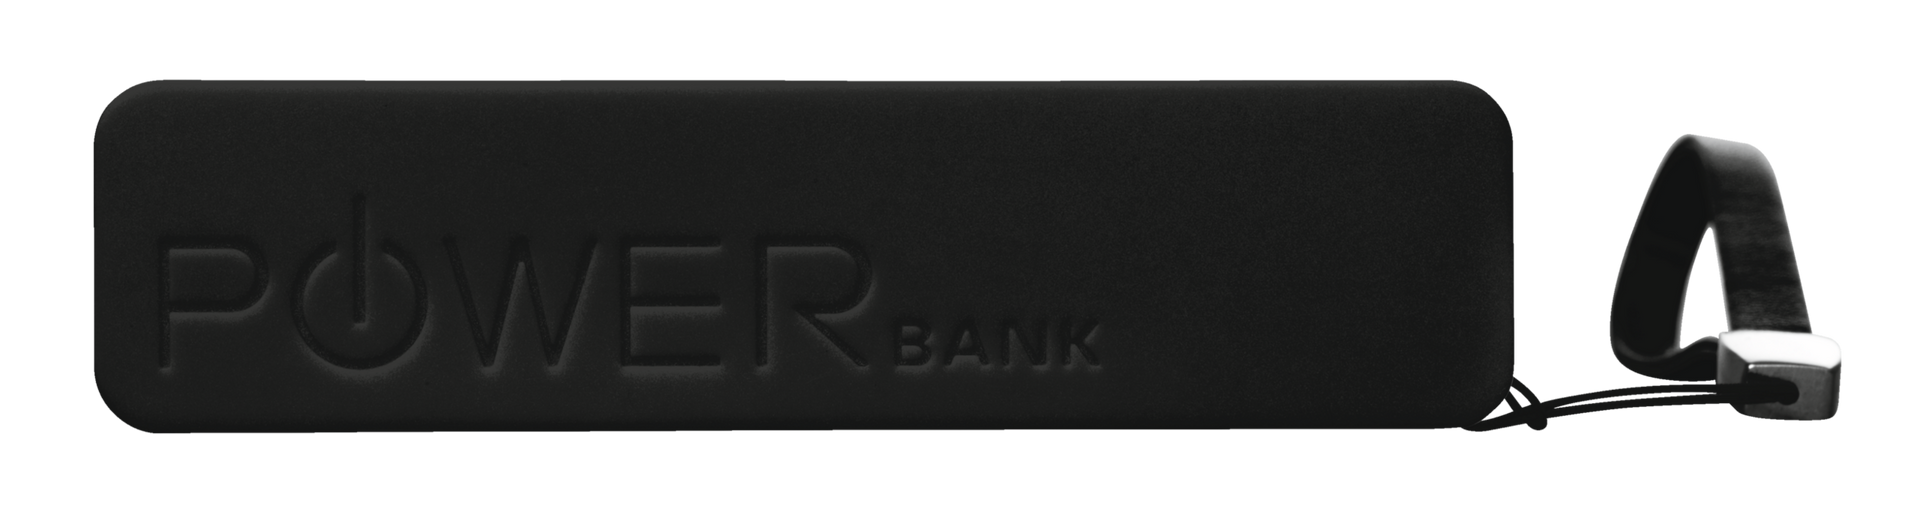 PowerBank Portable Phone Charger - black-Top